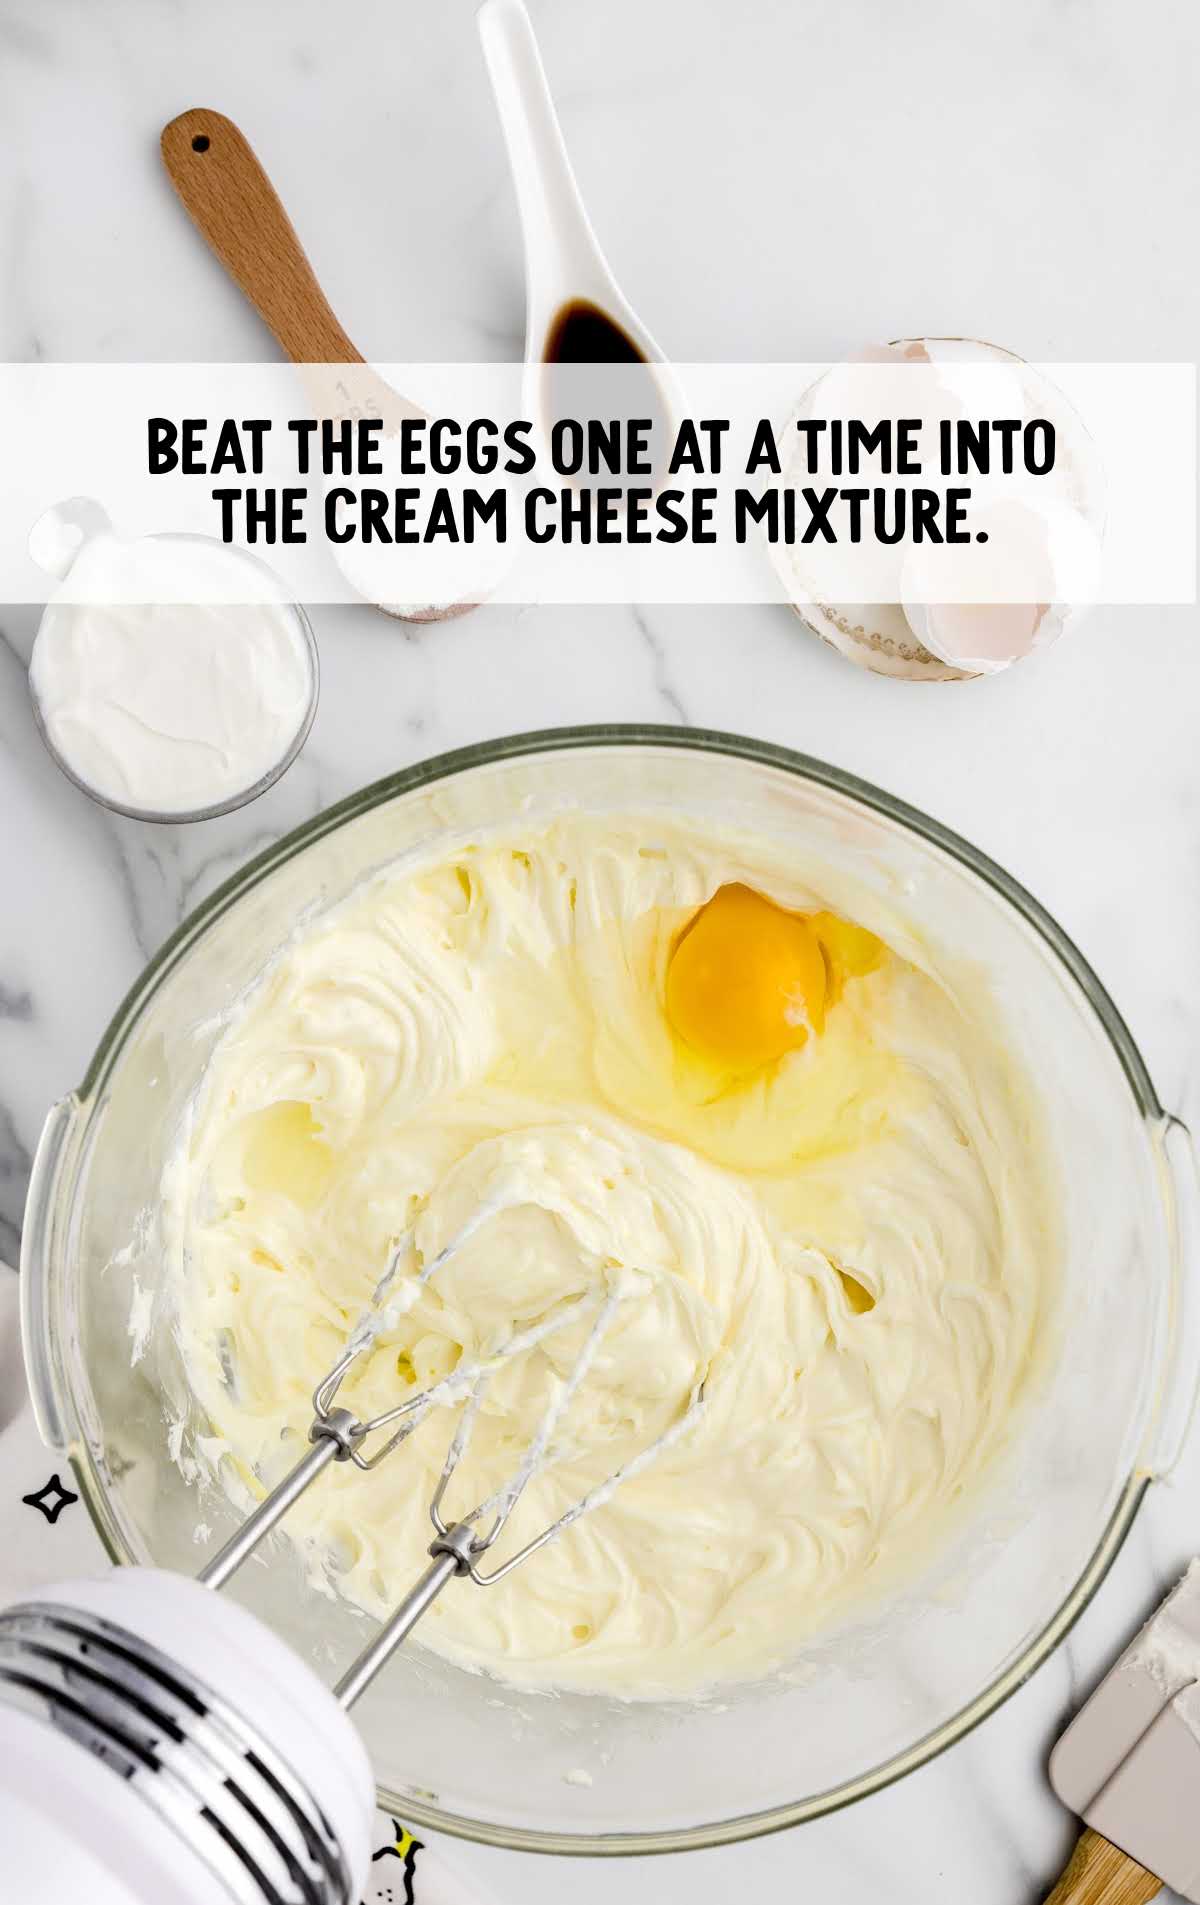 eggs blended into the cream cheese mixture